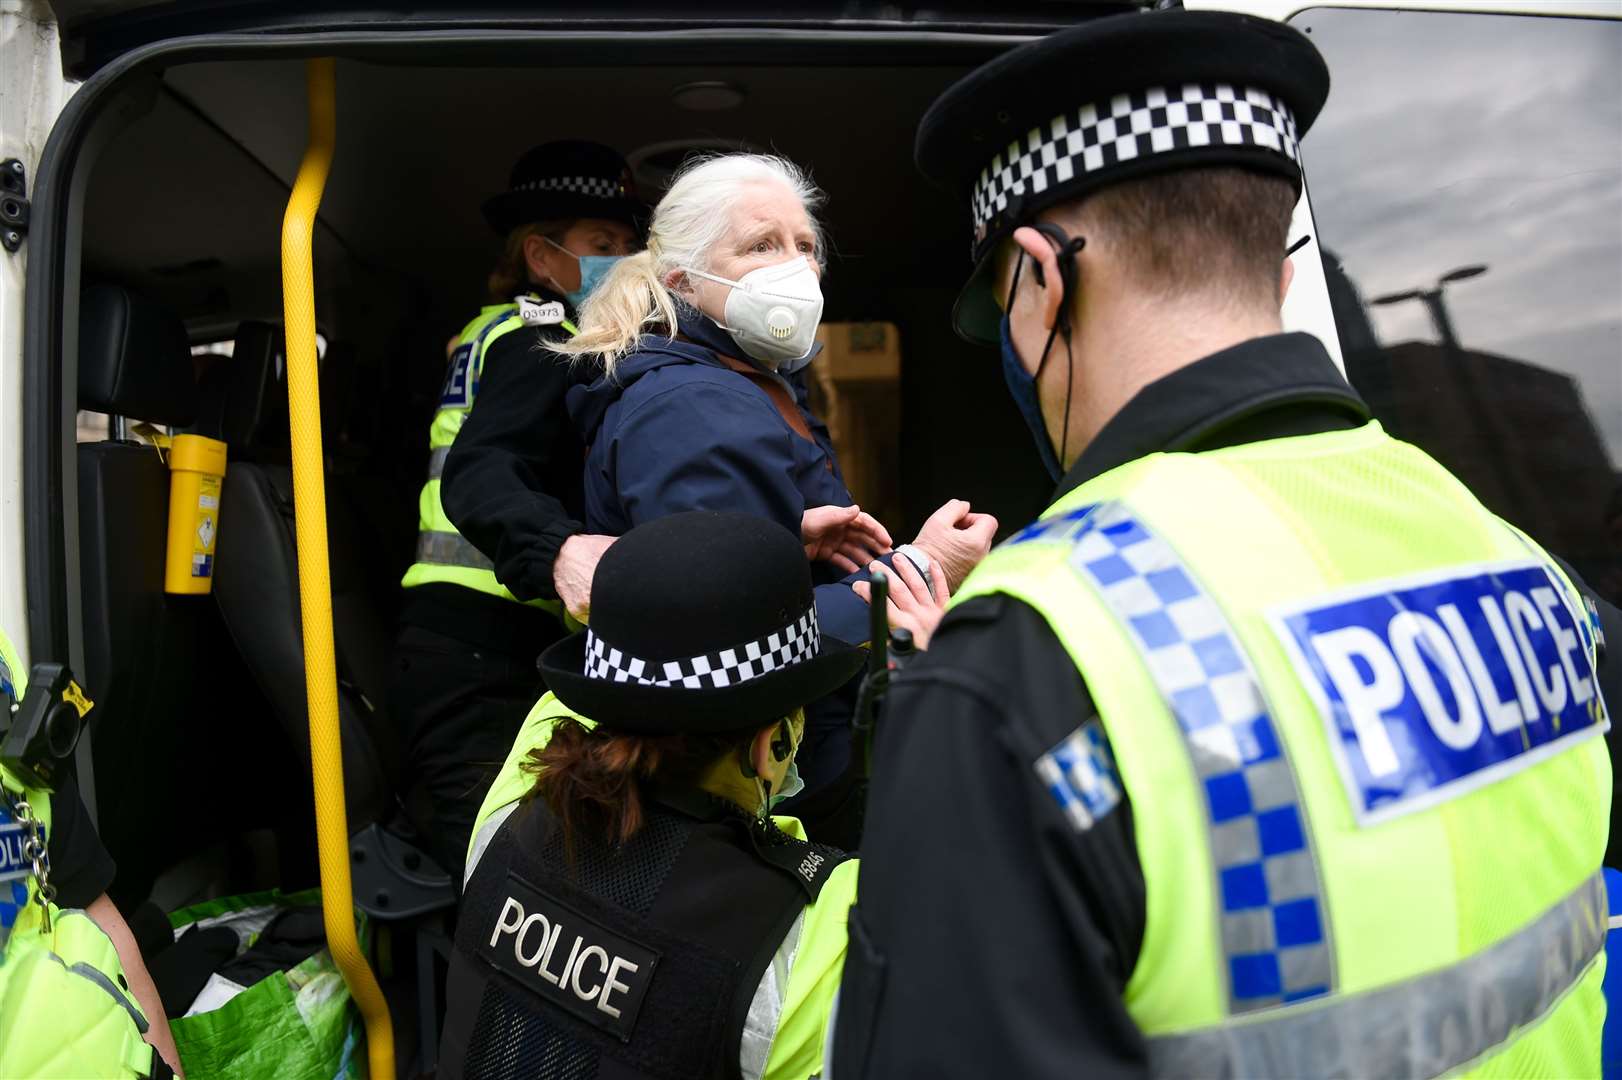 Police detain a demonstrator after breaking up a protest in Manchester, over the proposed 1% pay rise for NHS workers (Jacob King/PA)